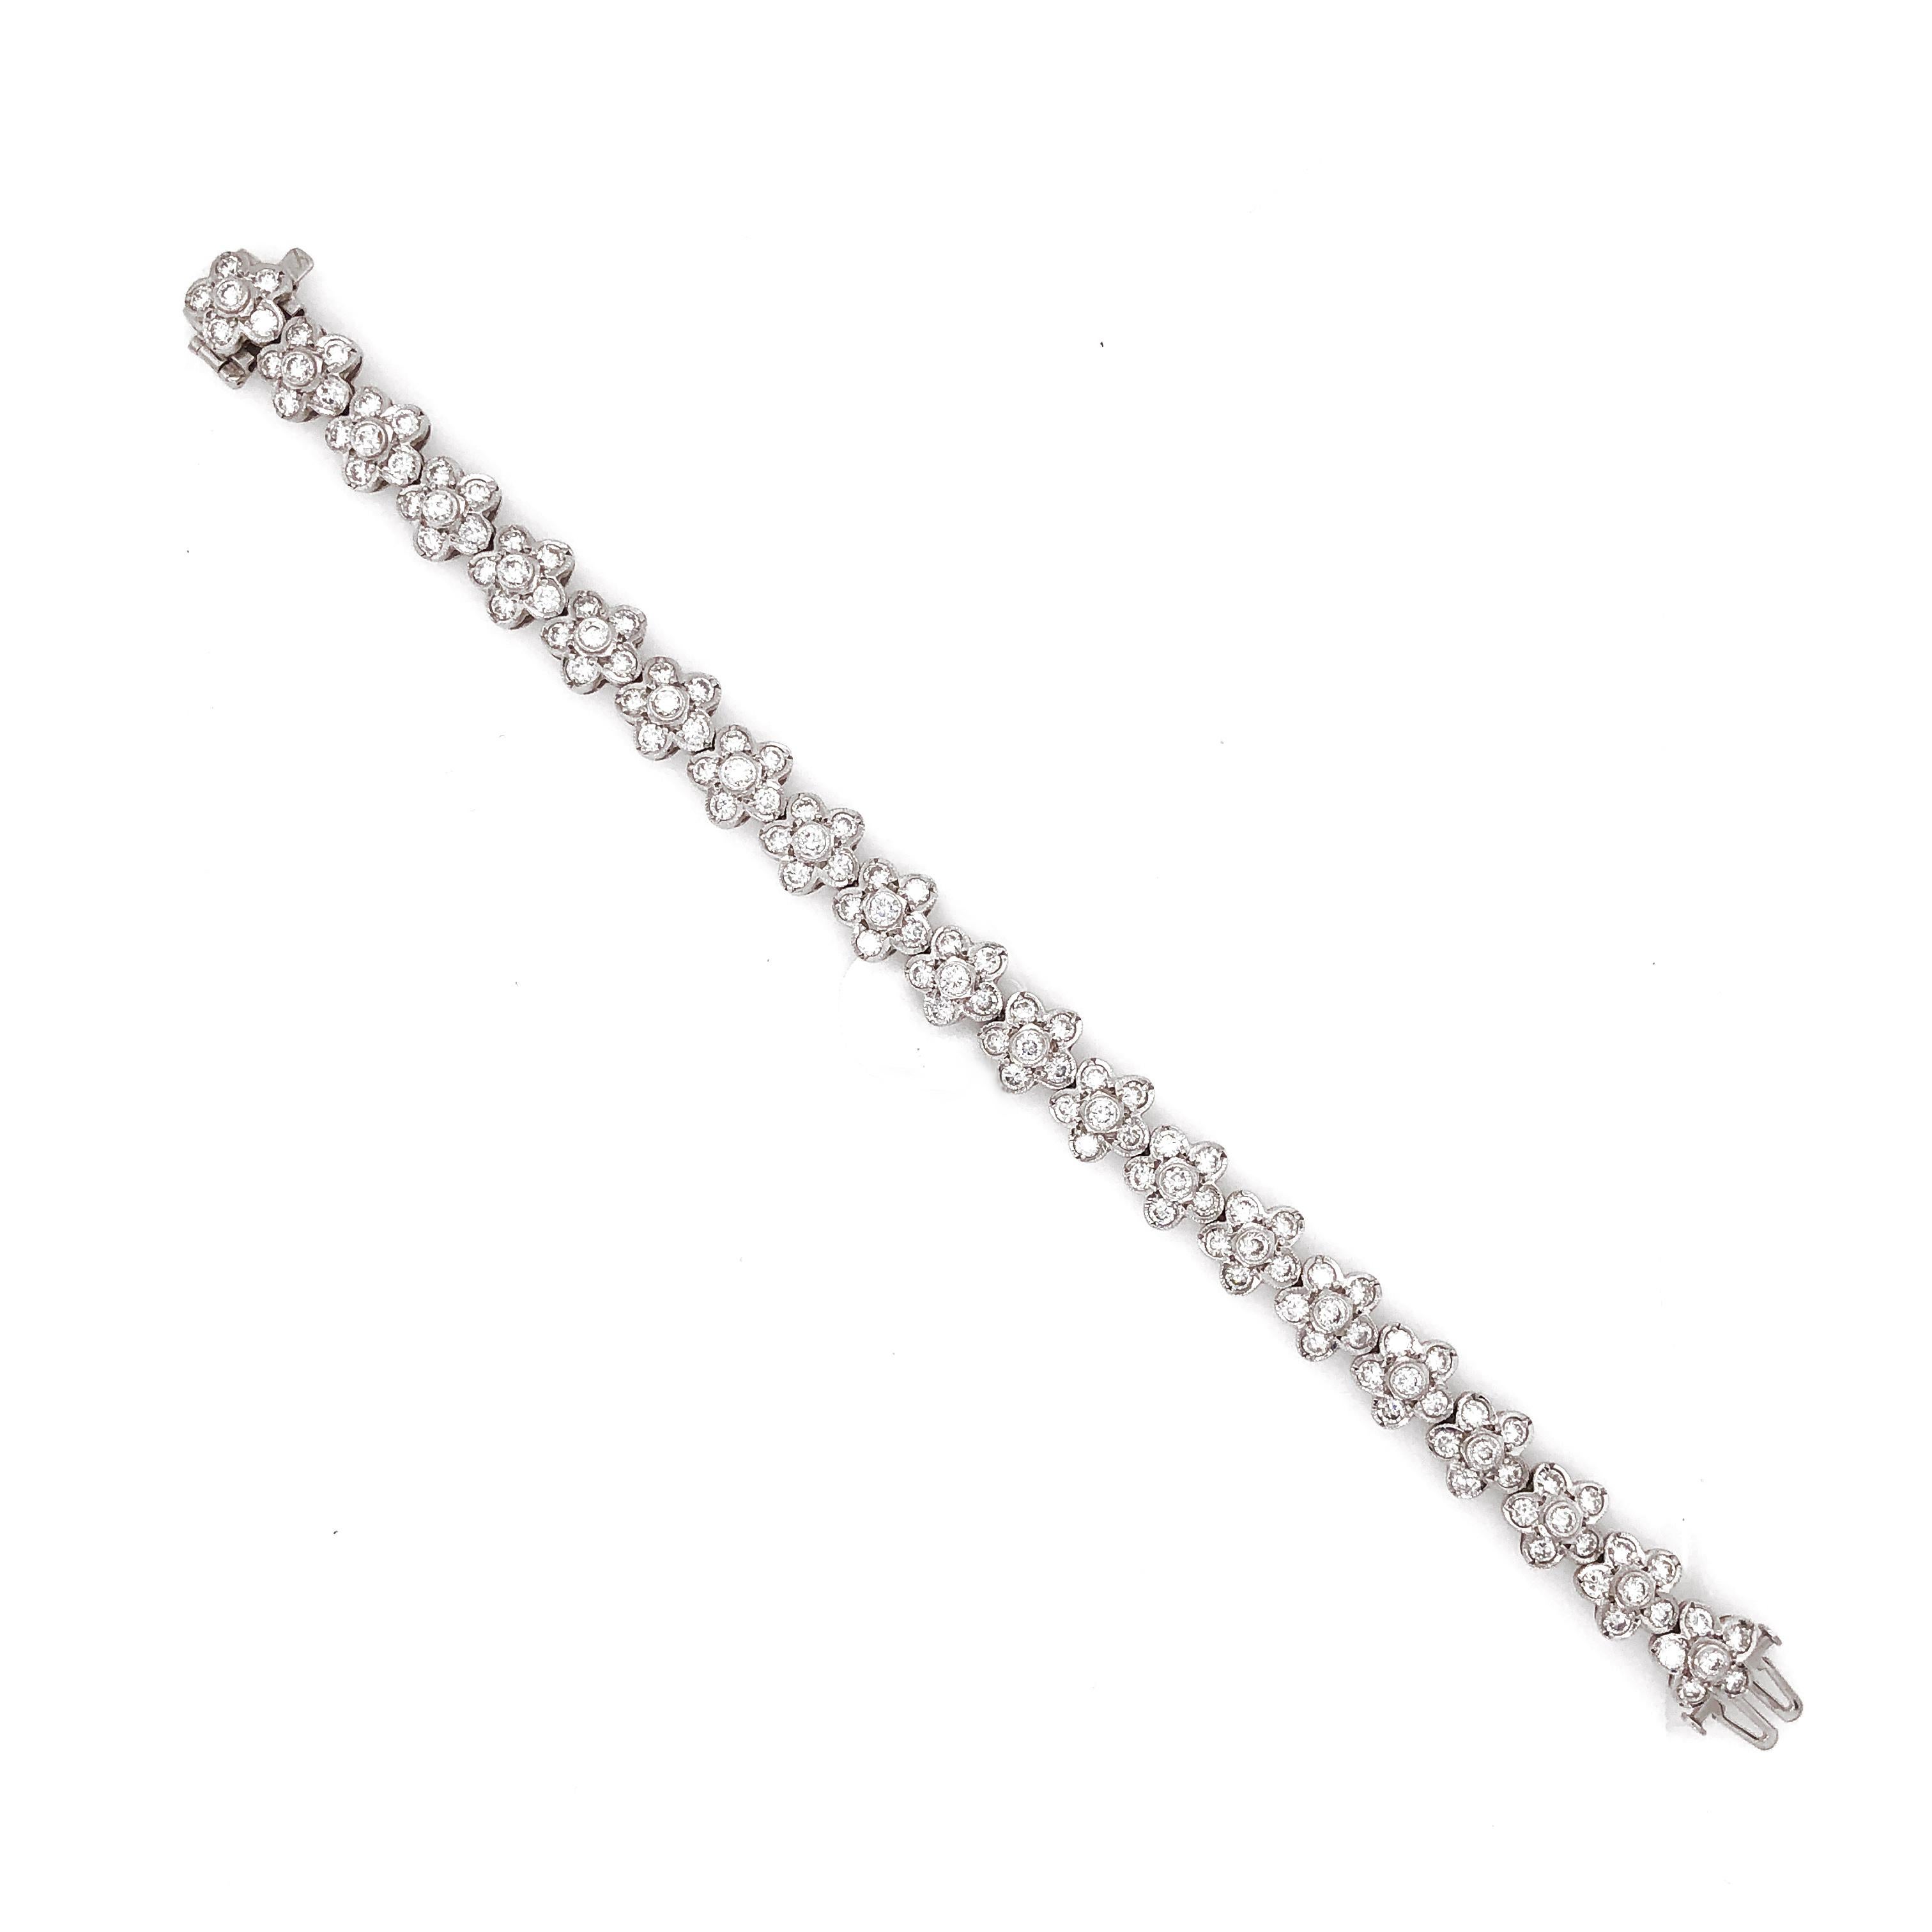 Beautiful contemporary design of flowers linked together in a diamond platinum link bracelet.
Covered by round cut white diamonds 7.79 ct in total.
Diamonds are all natural in G-H Color Clarity VS. 
Platinum 950 metal.  
Width: 0.9 cm
Length: 17.6